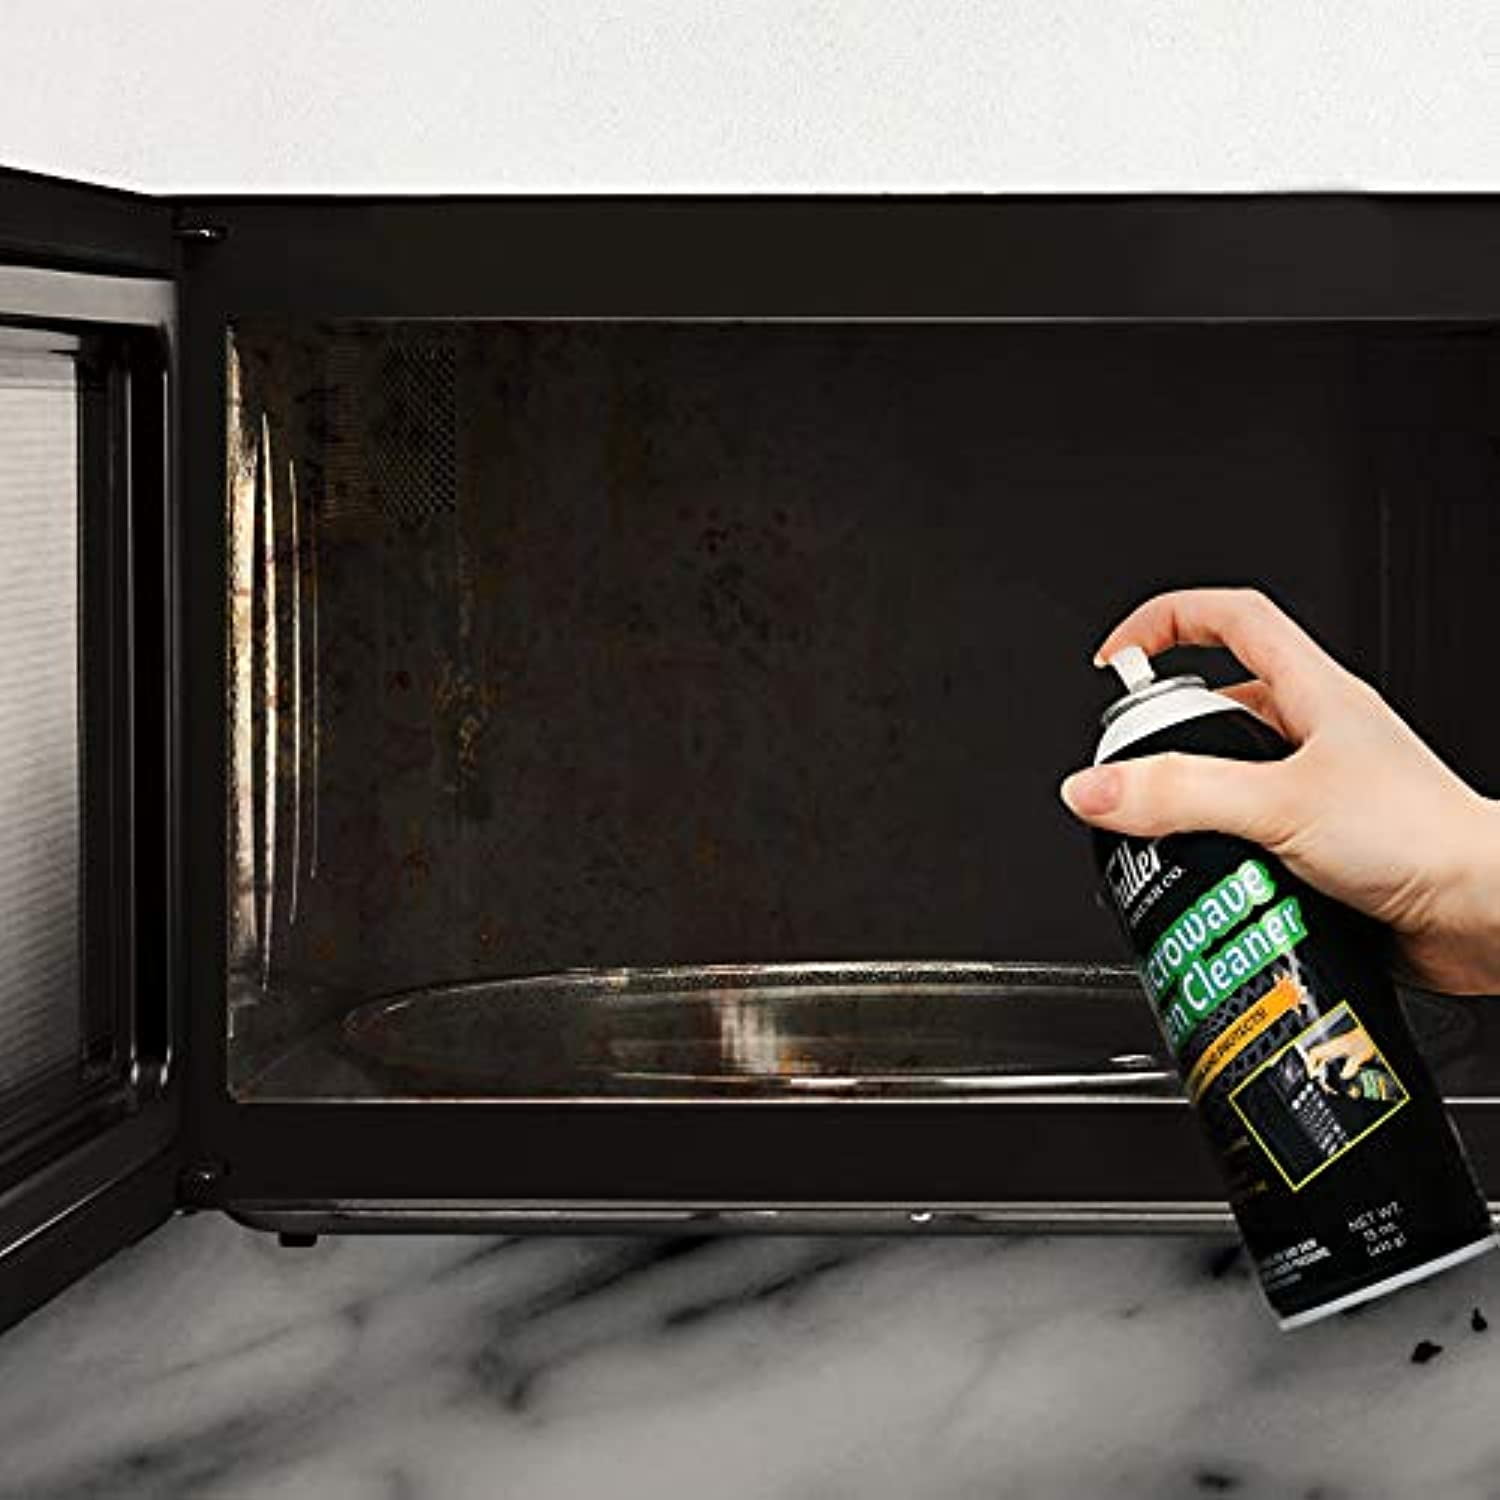 Fuller Brush Microwave Oven Cleaner - Heavy Duty Spray On Cleaner Removes  Splattered Grease Baked On Food and More - Spray and Wipe Off Formula Keeps